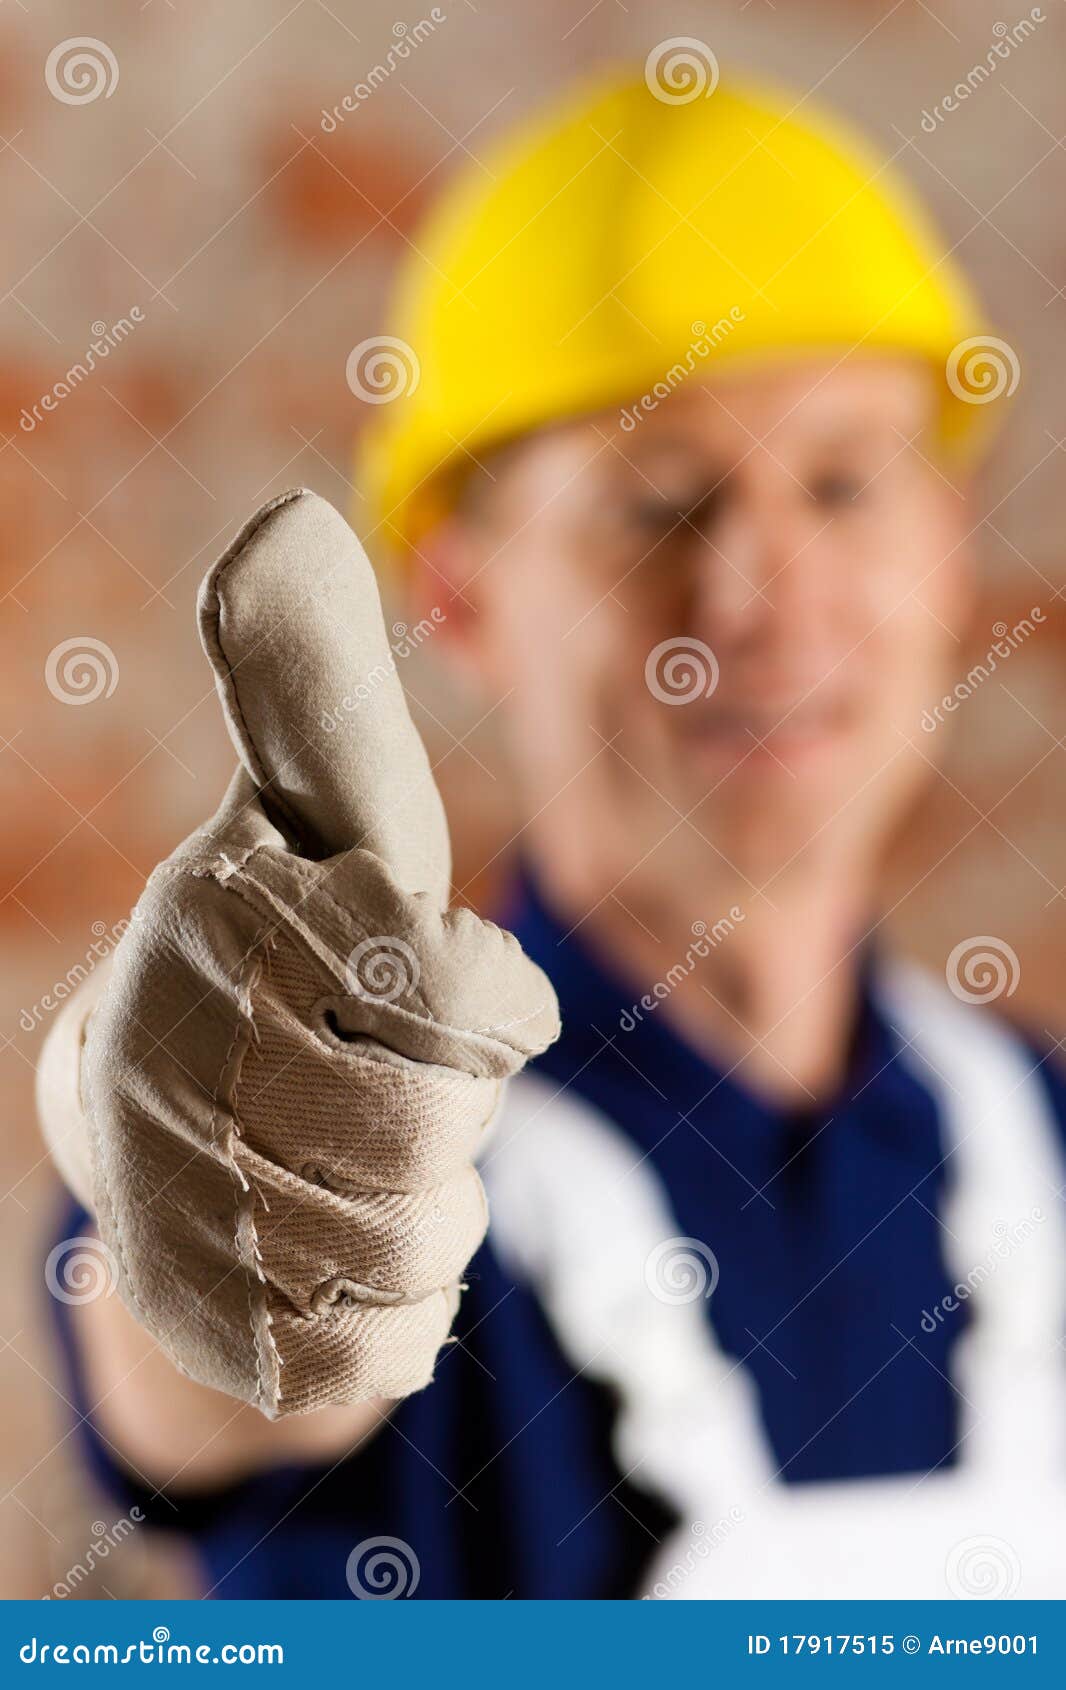 friendly and reliable construction worker